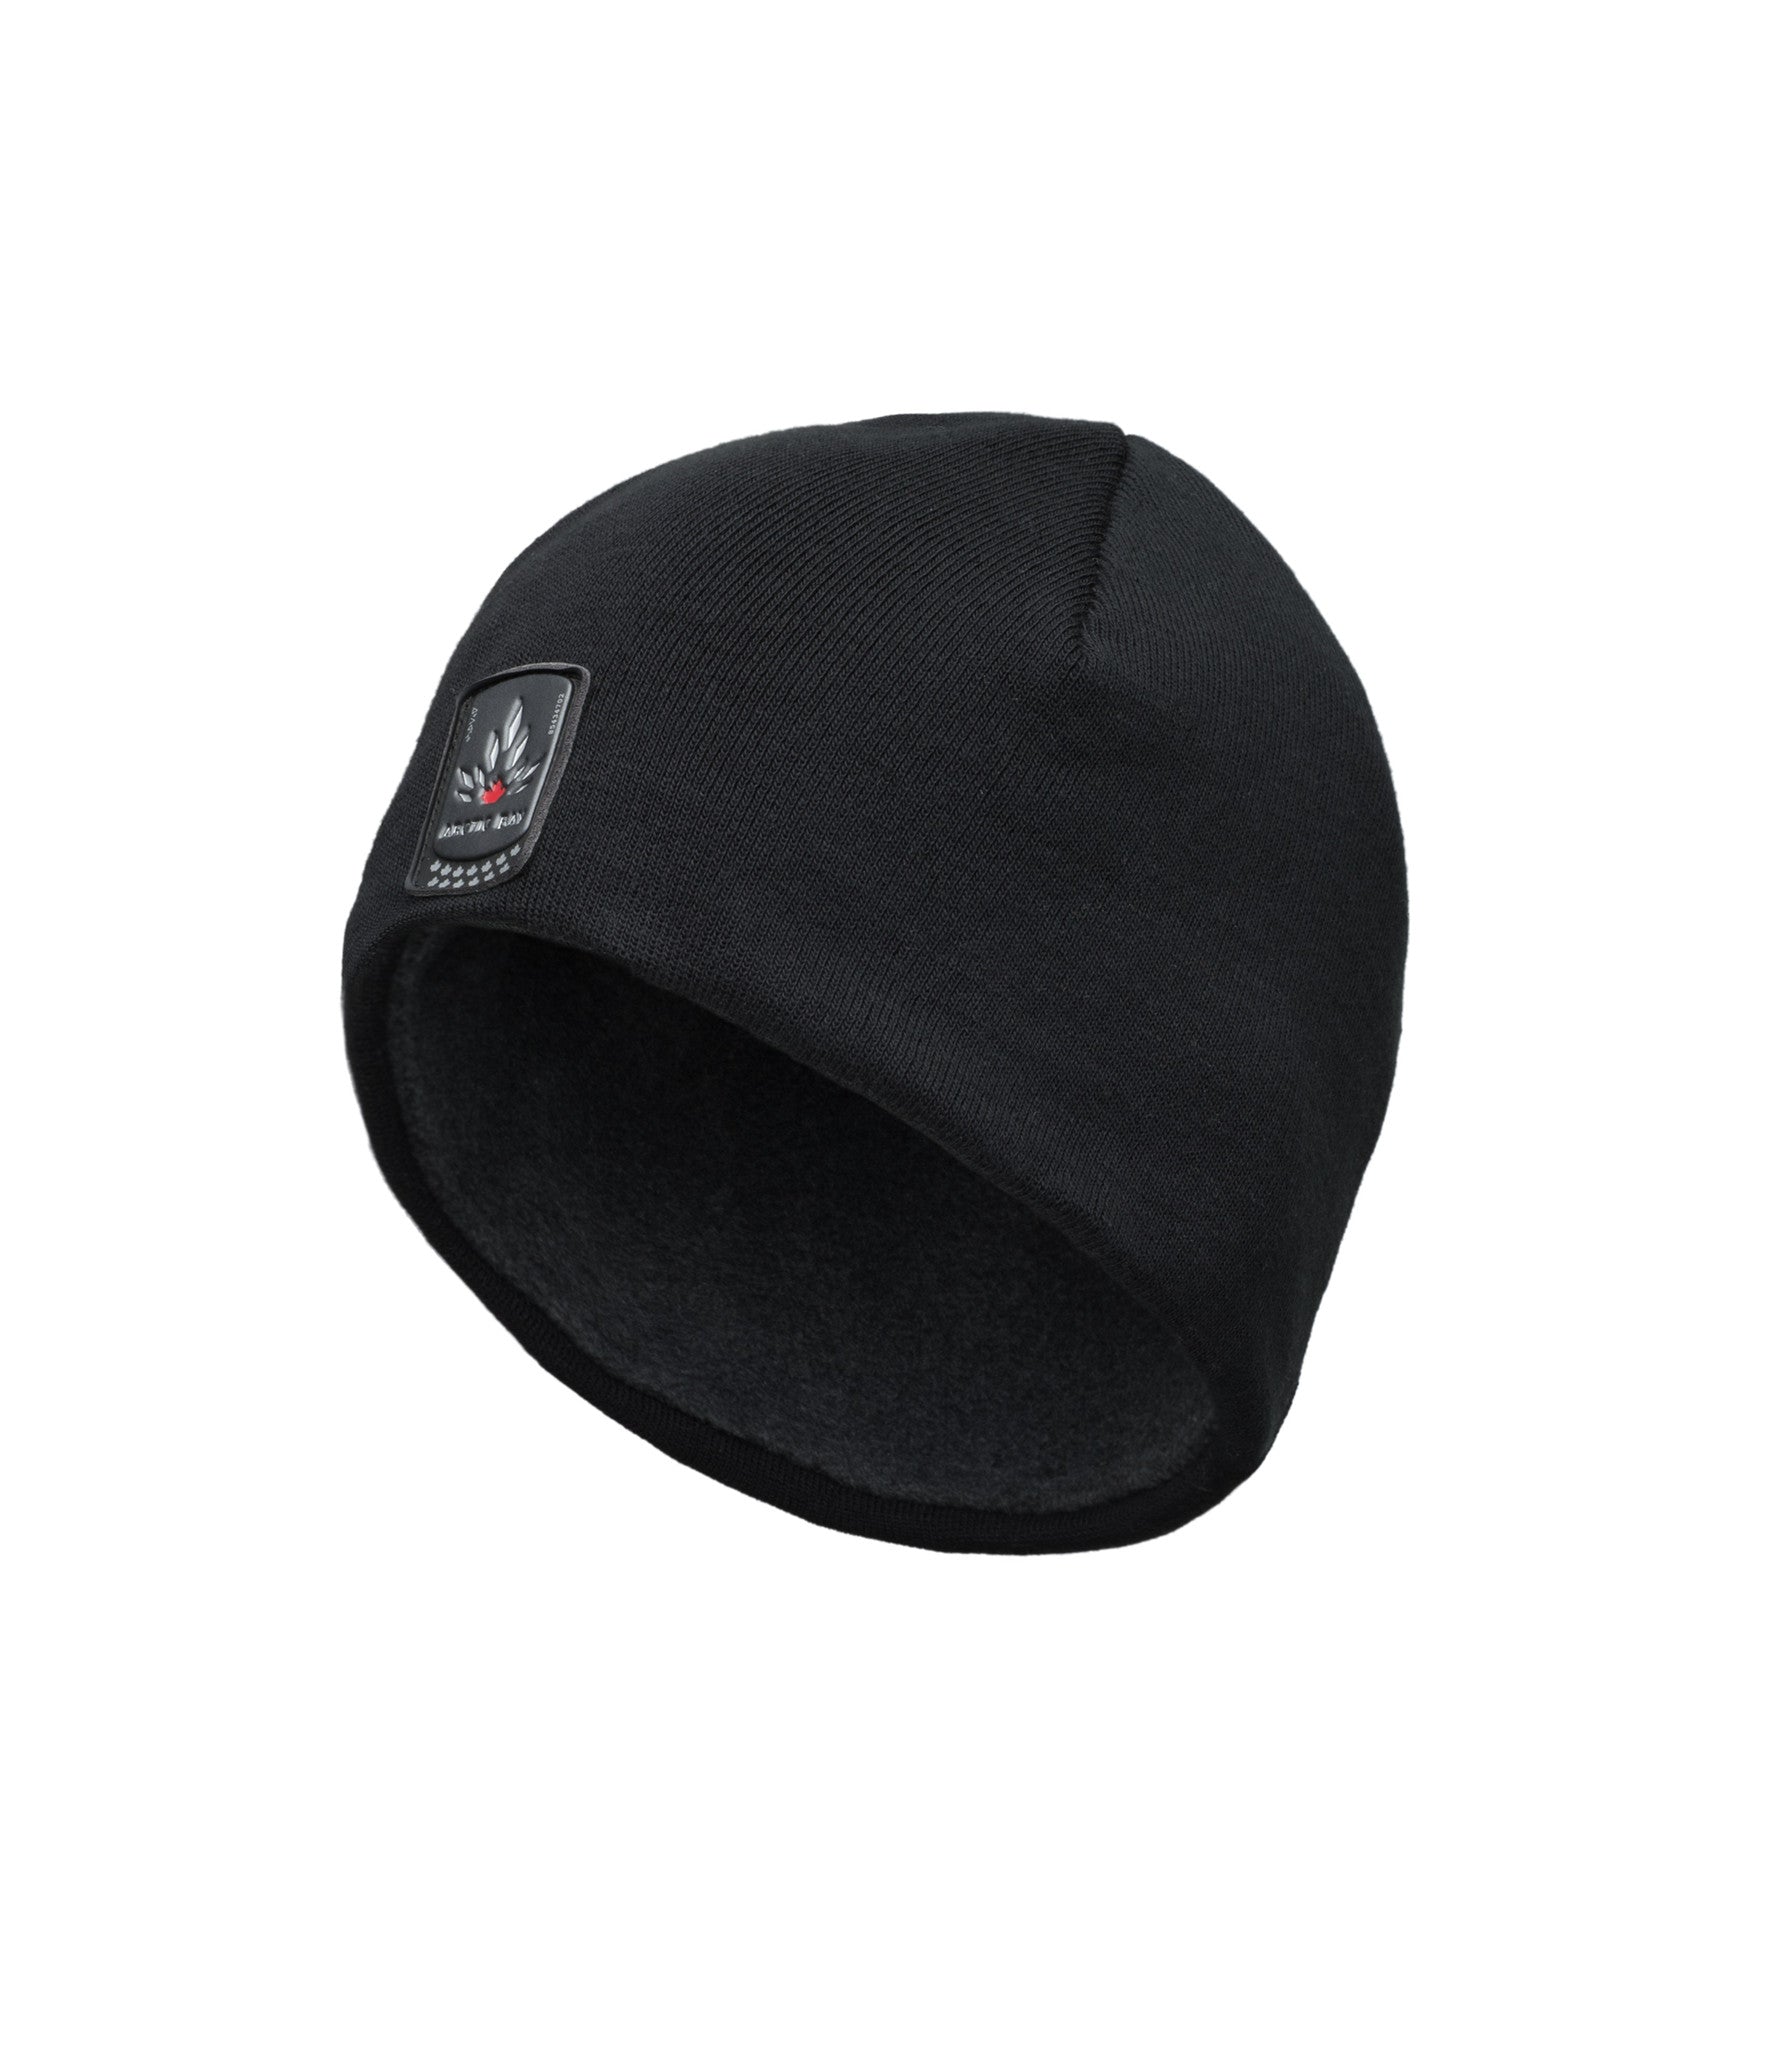 Beanie Hat For Men and Women | Merino Wool Beanie Hat for Extreme Cold